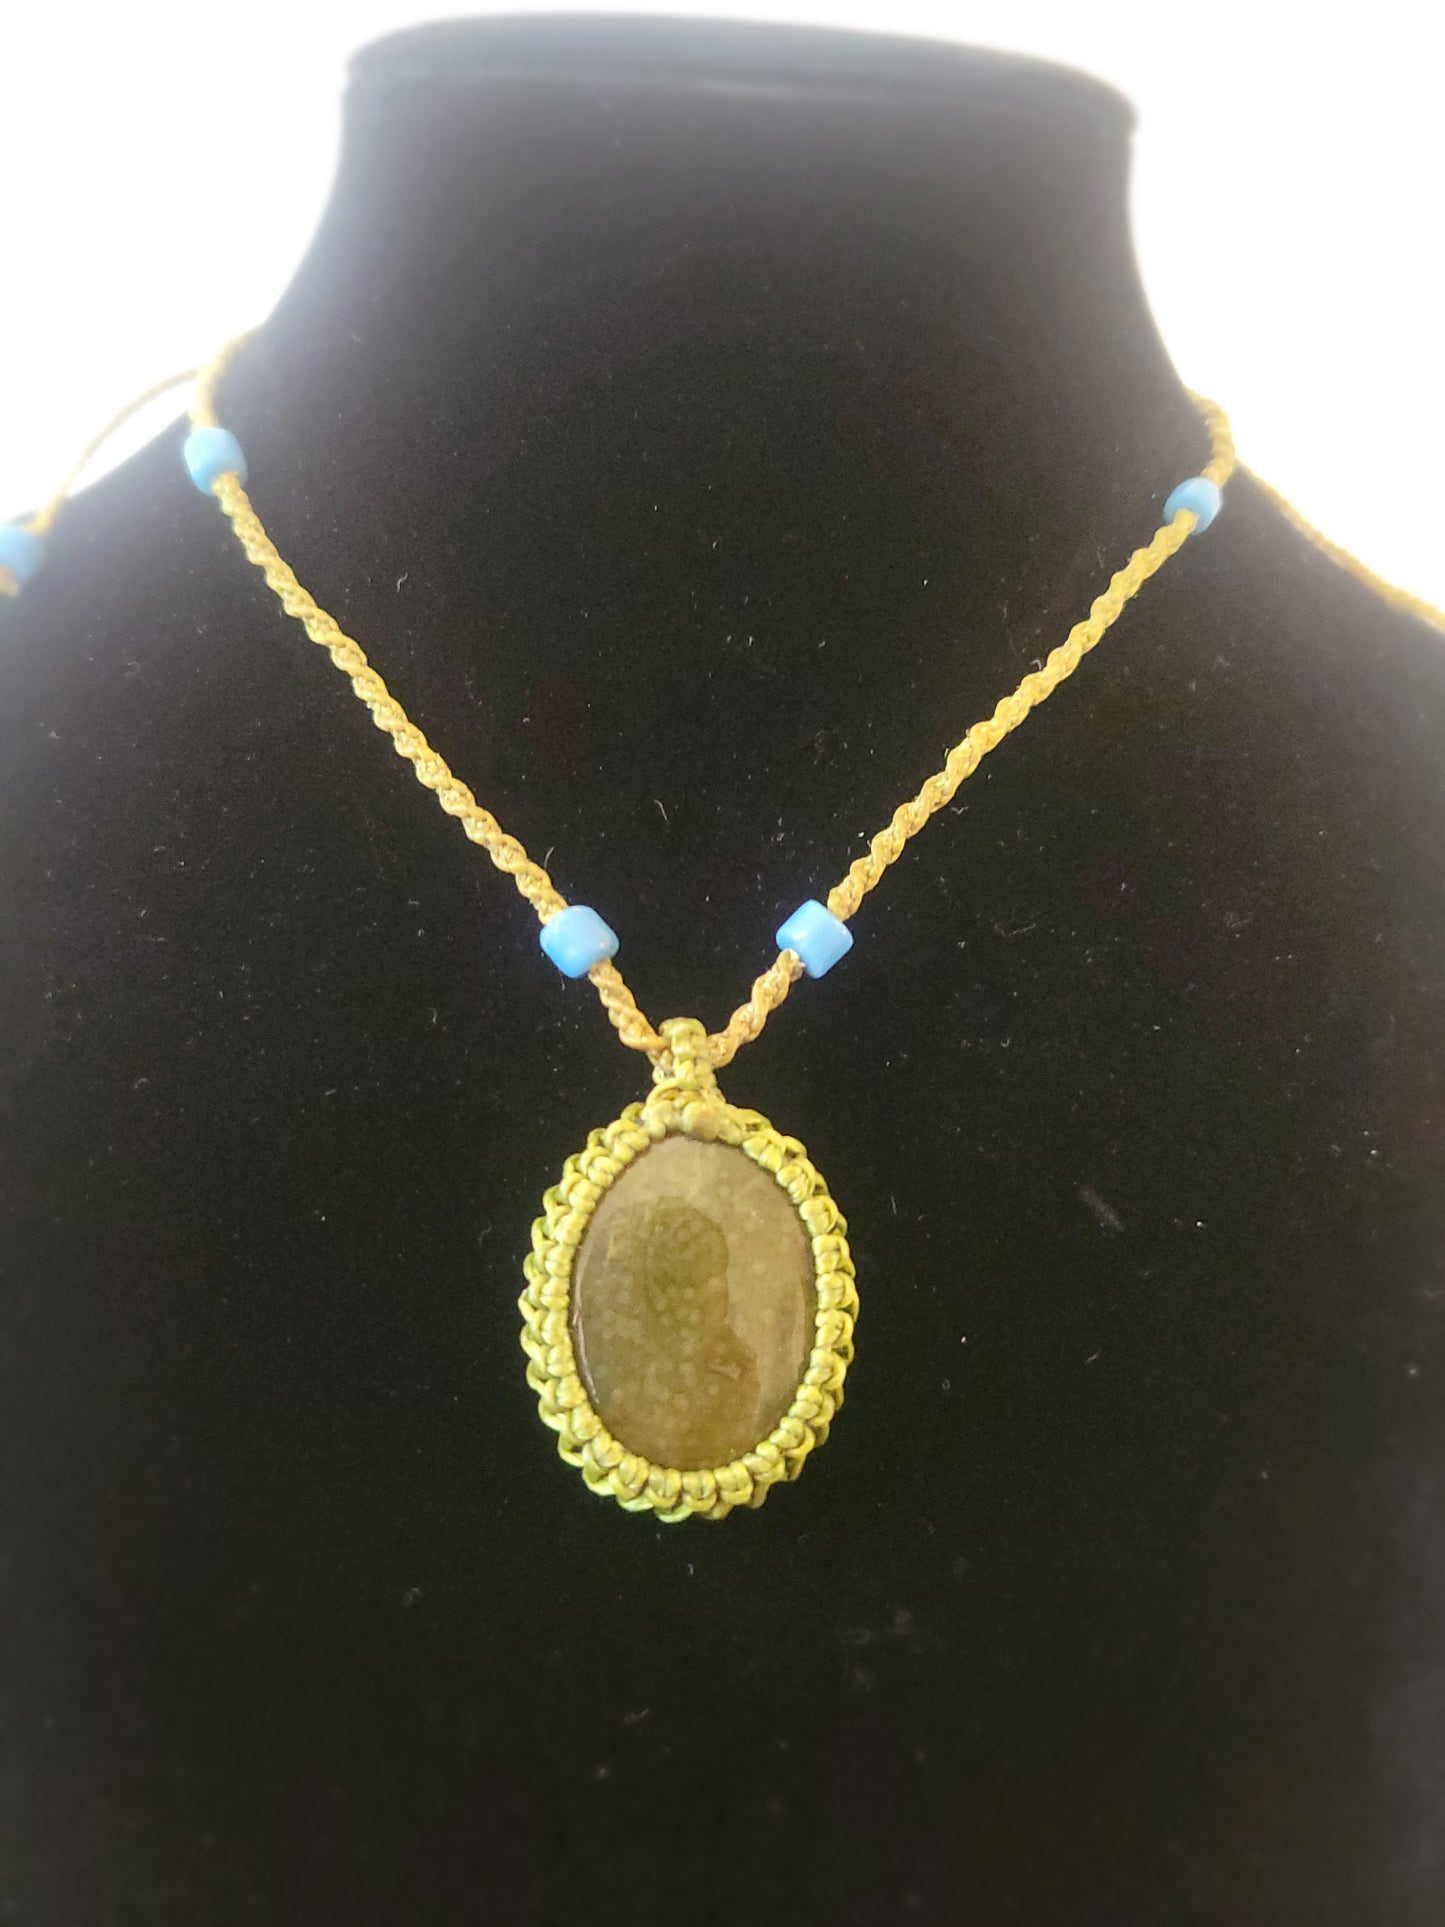 Enchanted Forest: Green Moss Agate Pendant on Spiral-Bound Micromacrame Necklace